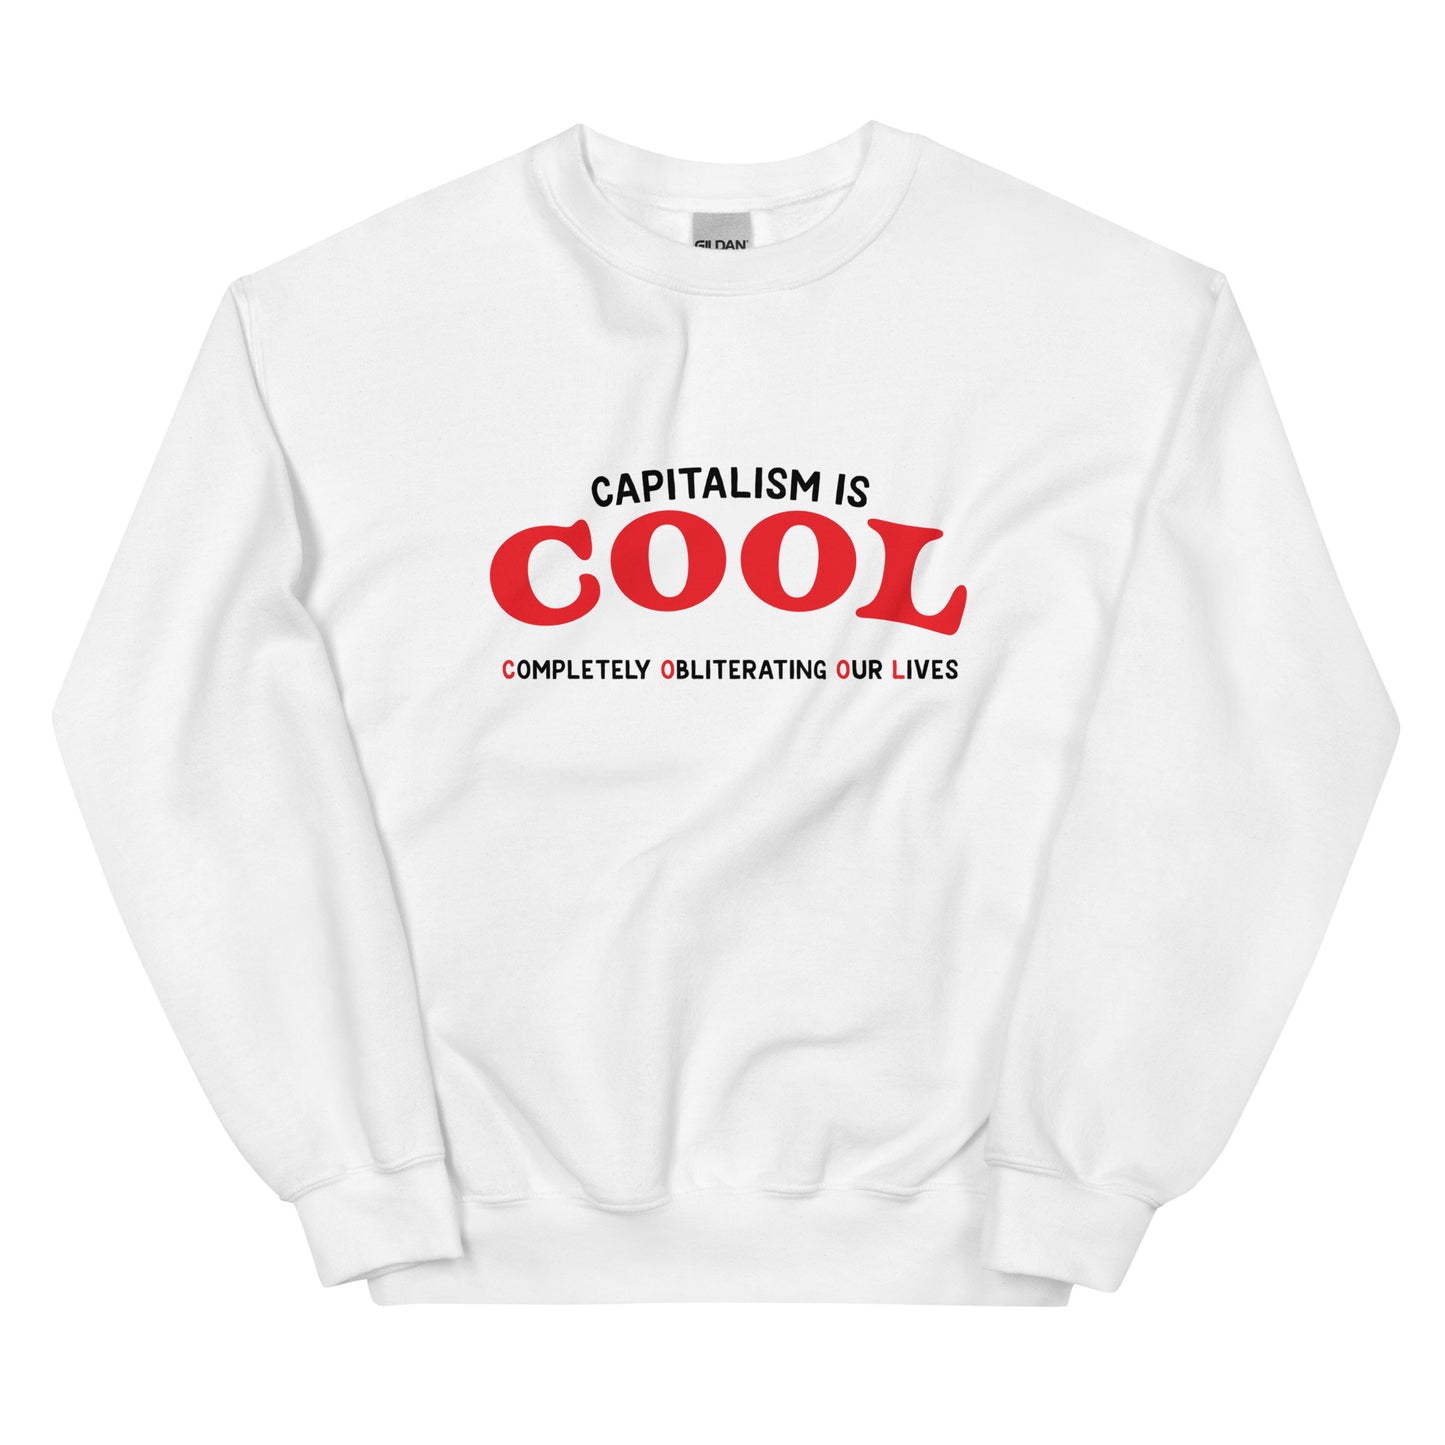 Capitalism is Cool (Completely Obliterating Our Lives) Unisex Sweatshirt